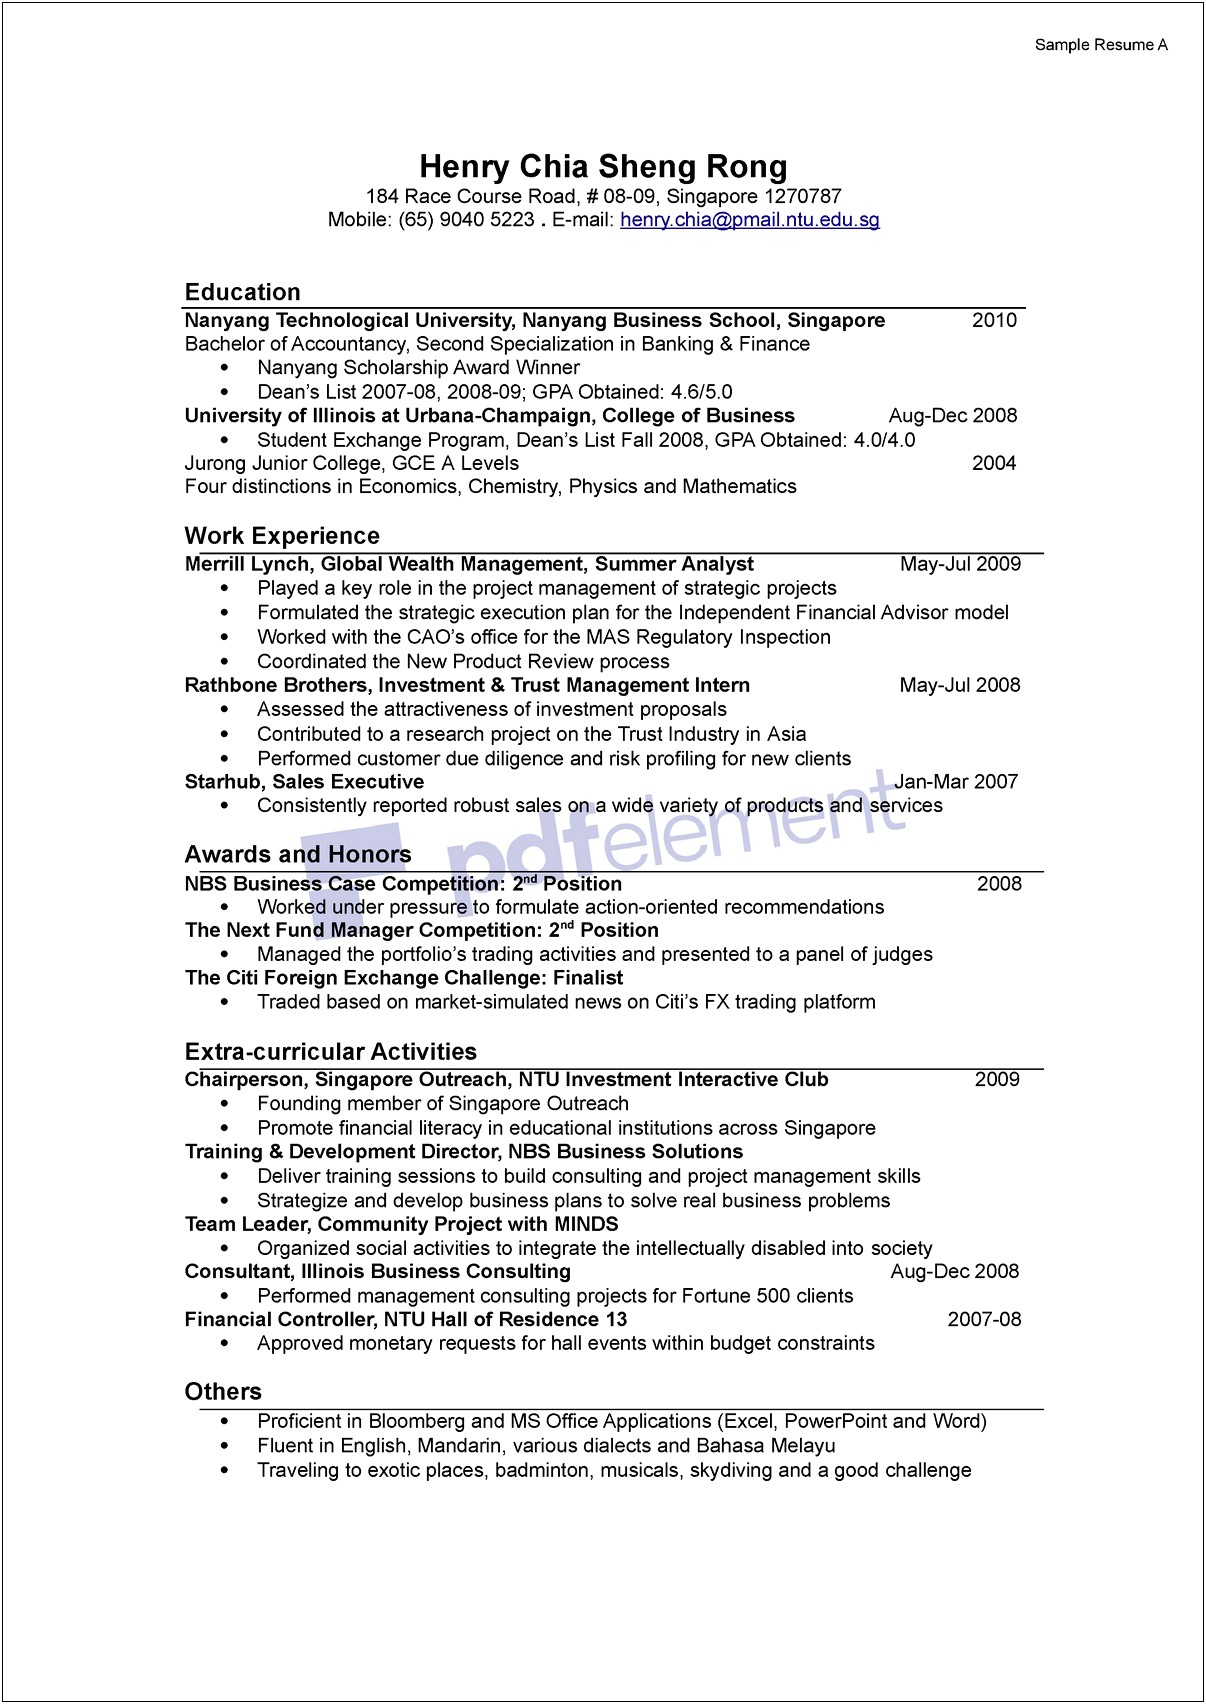 Resume Samples With Singapore Math